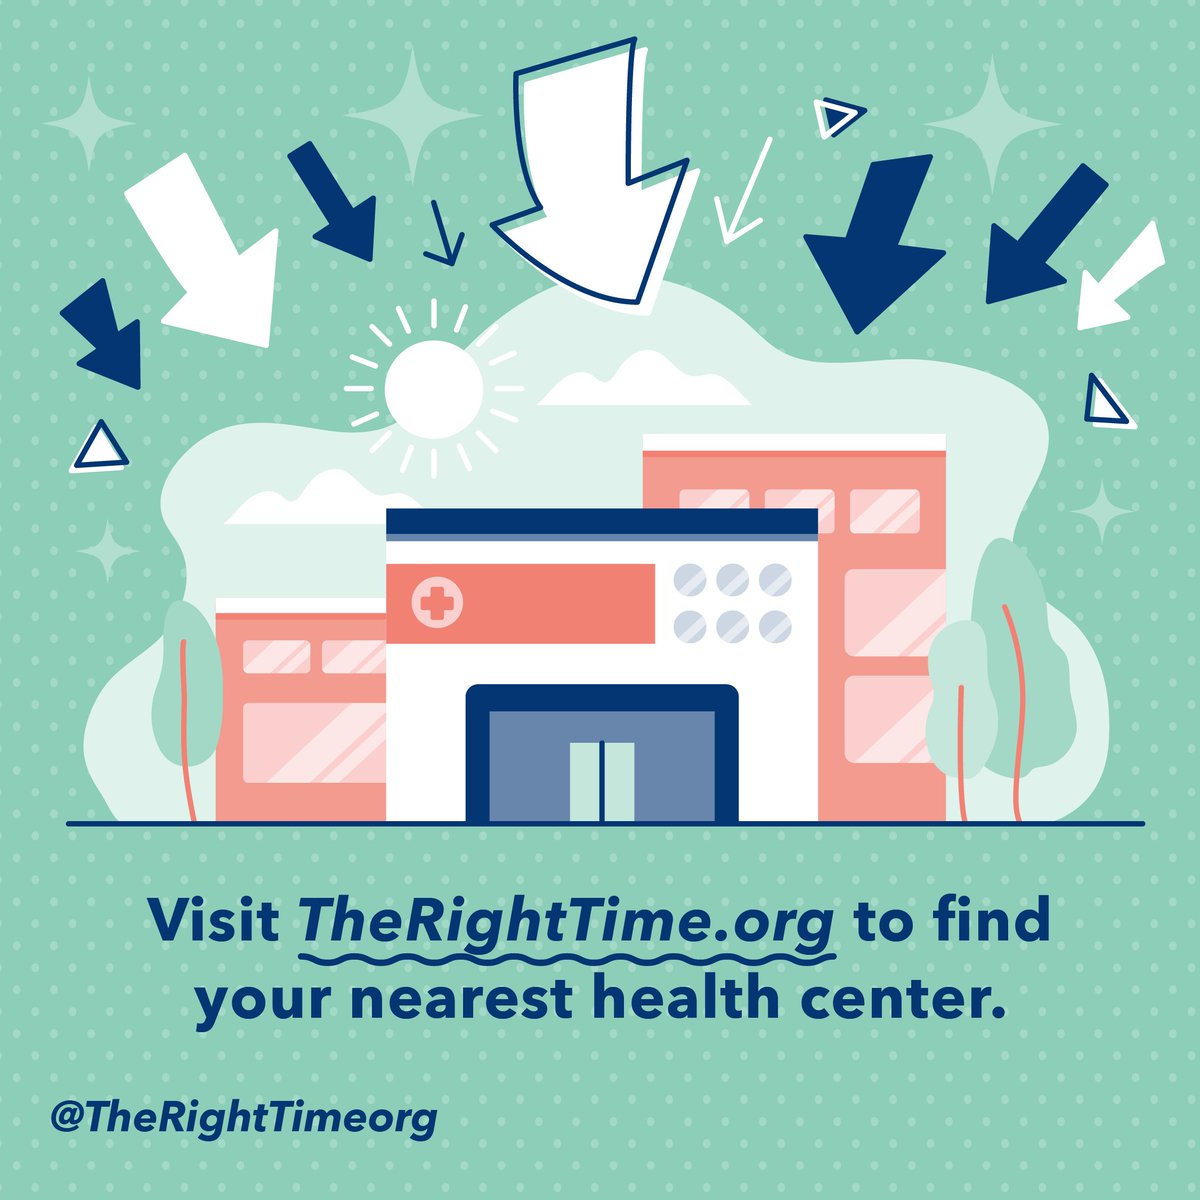 Across Missouri, partner organizations that form #TheRightTime health center network offer the full range of birth control methods (and provide free or low-cost birth control to those who need it). 
TheRightTime.org 

#Missouri #Healthcare